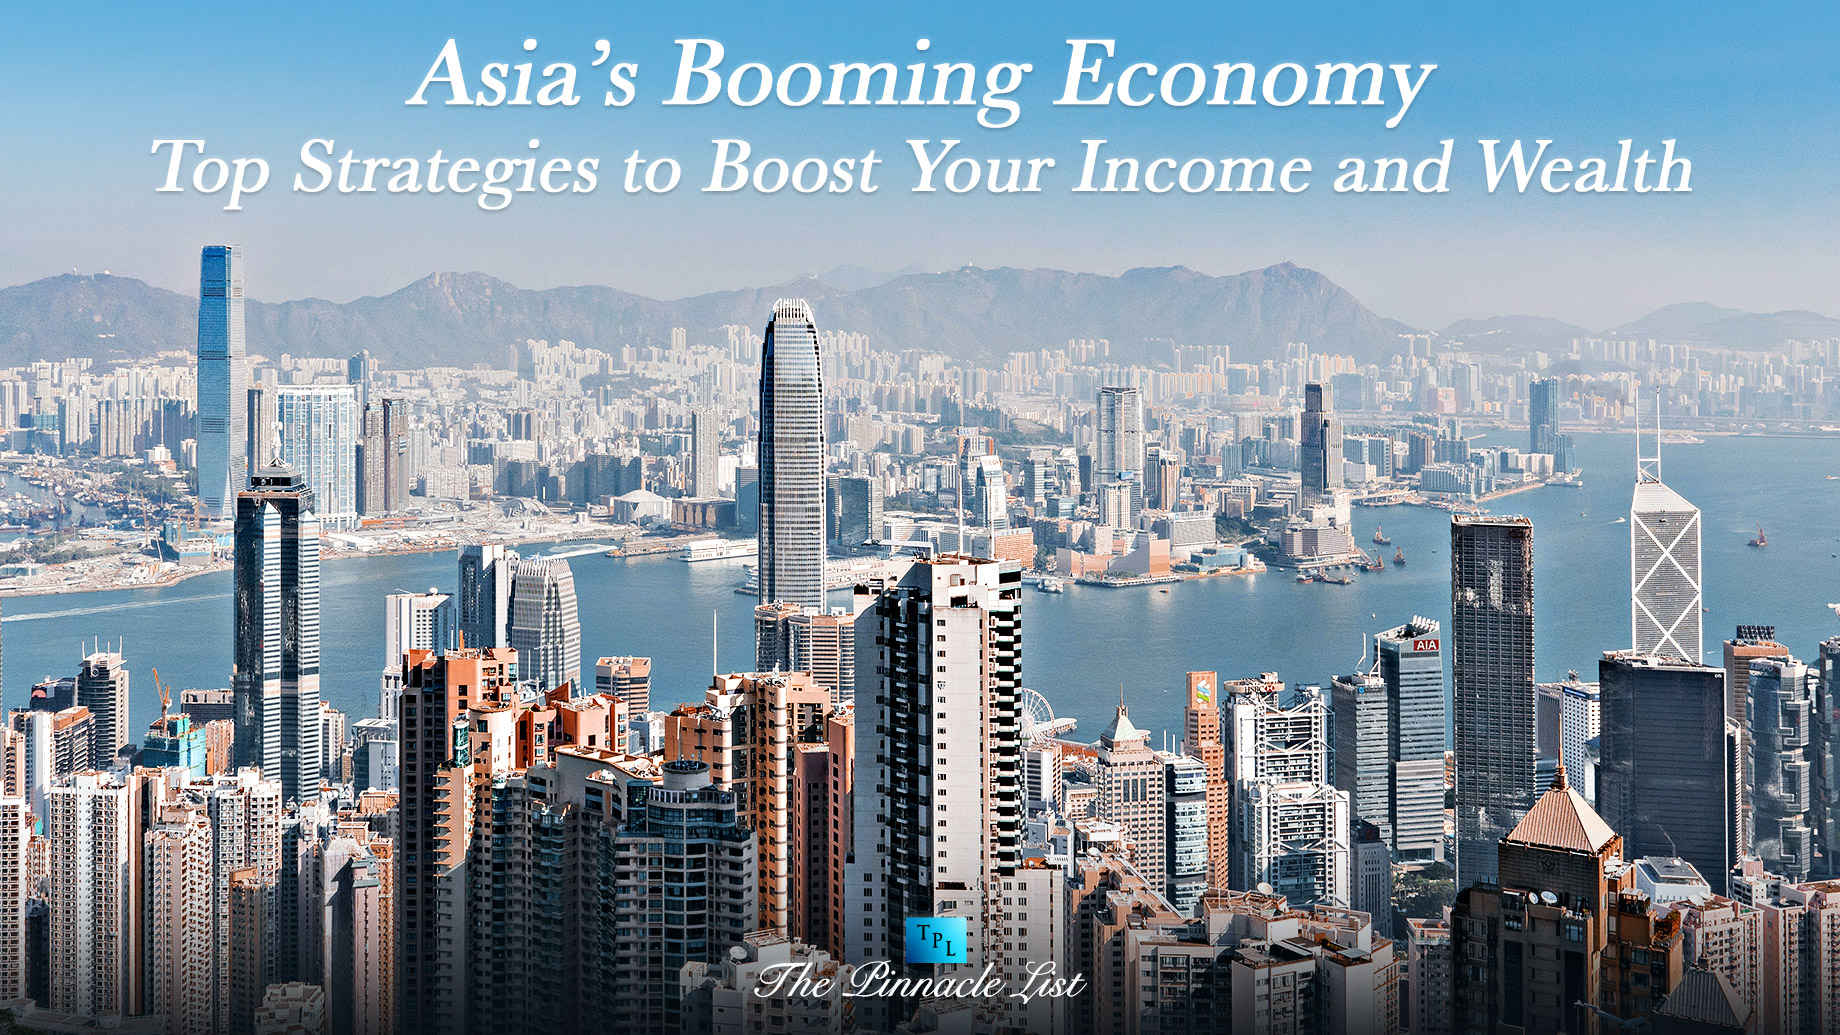 Asia's Booming Economy: Top Strategies to Boost Your Income and Wealth